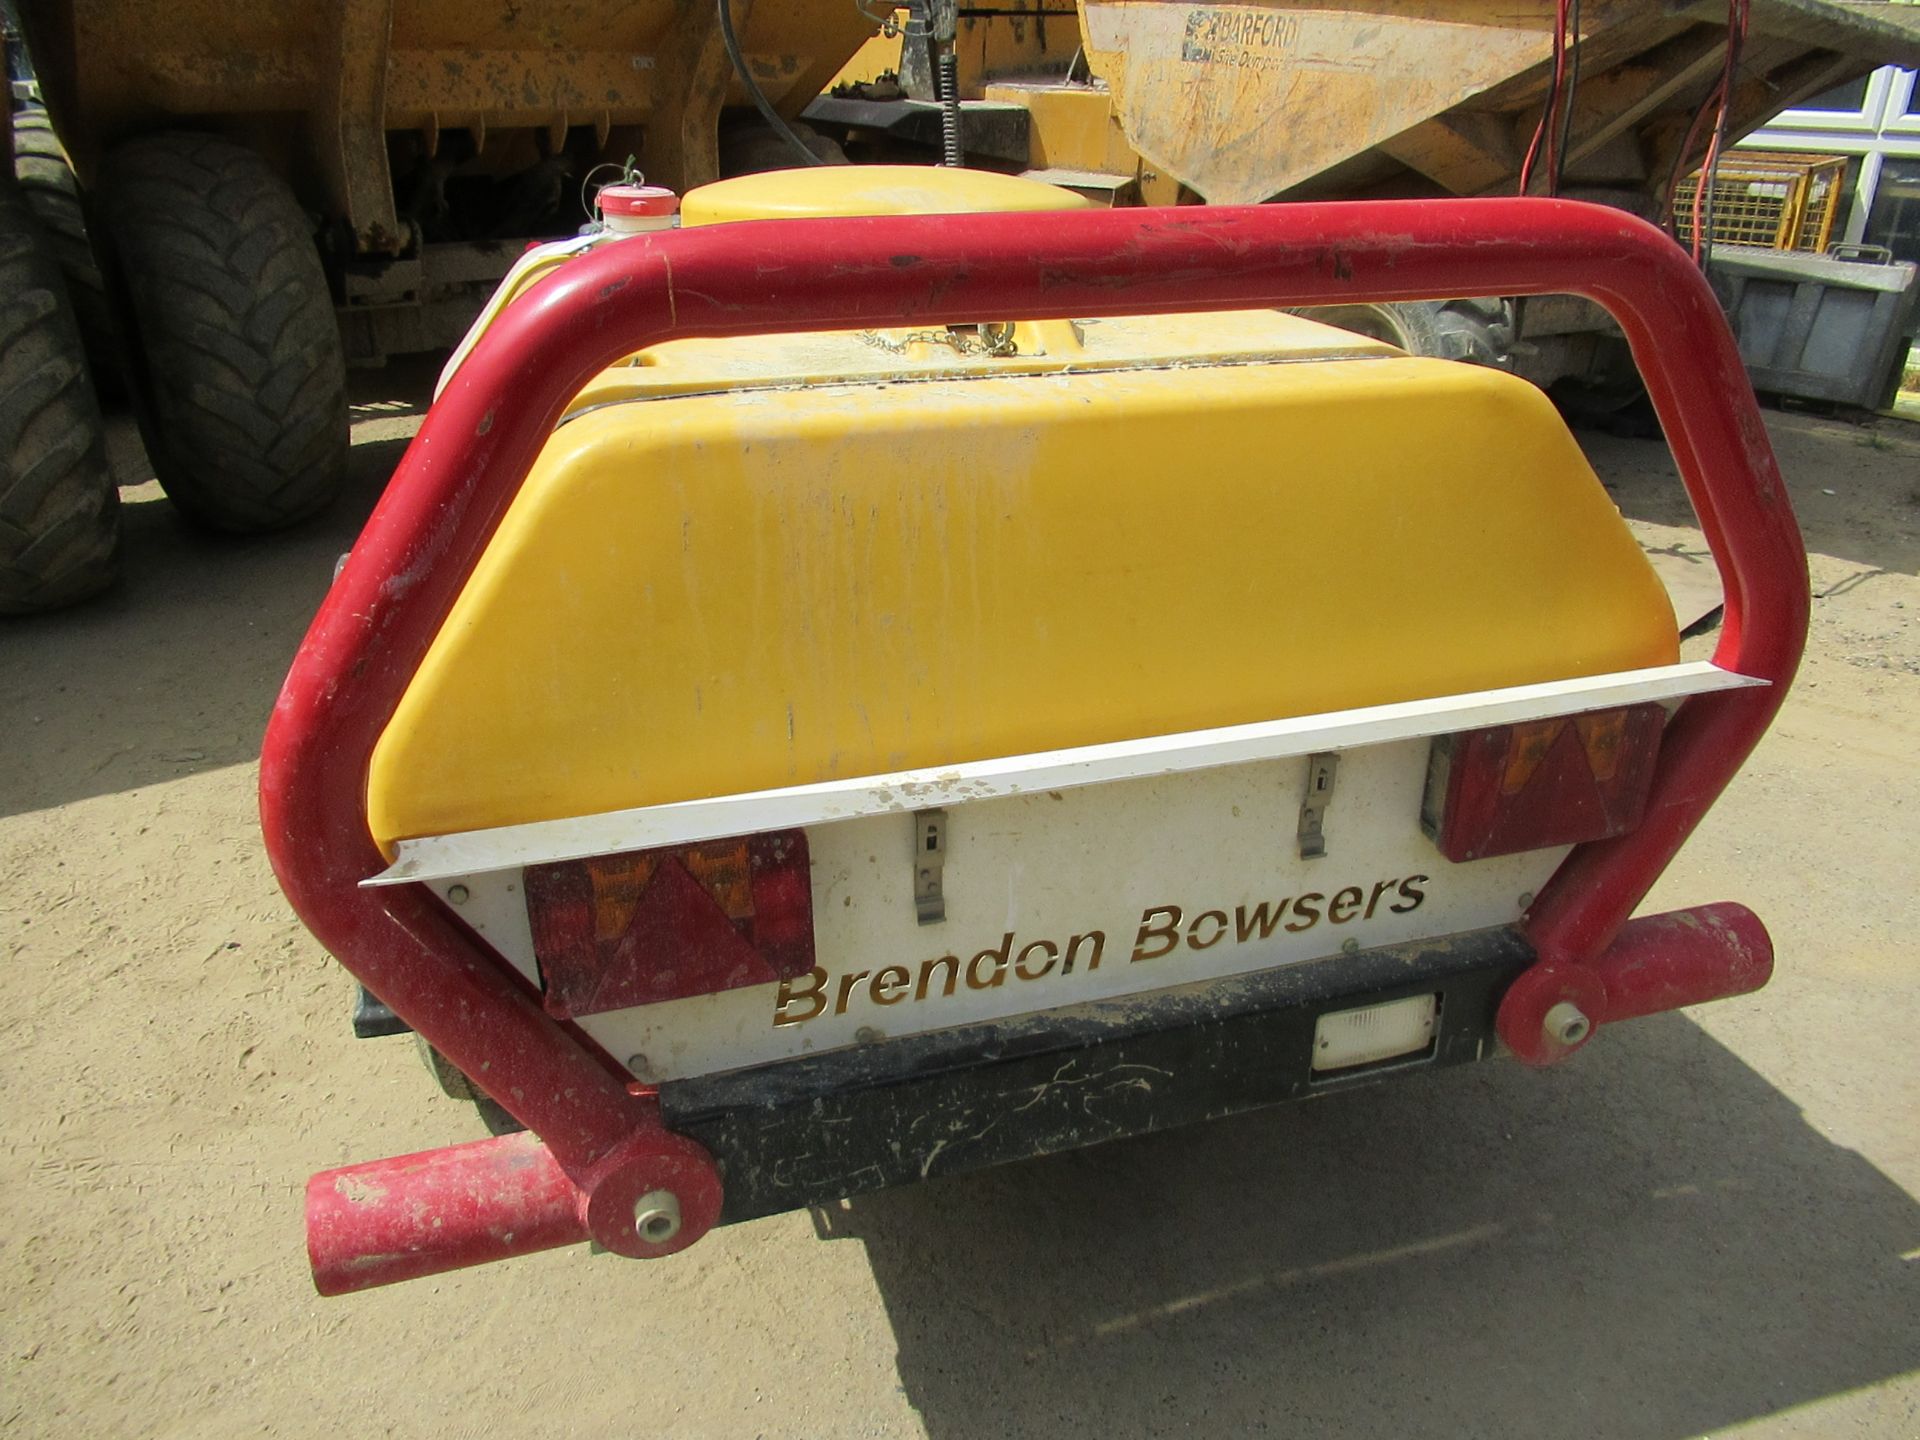 Brendon BB1000 towed diesel power washer/bowser - Image 2 of 5